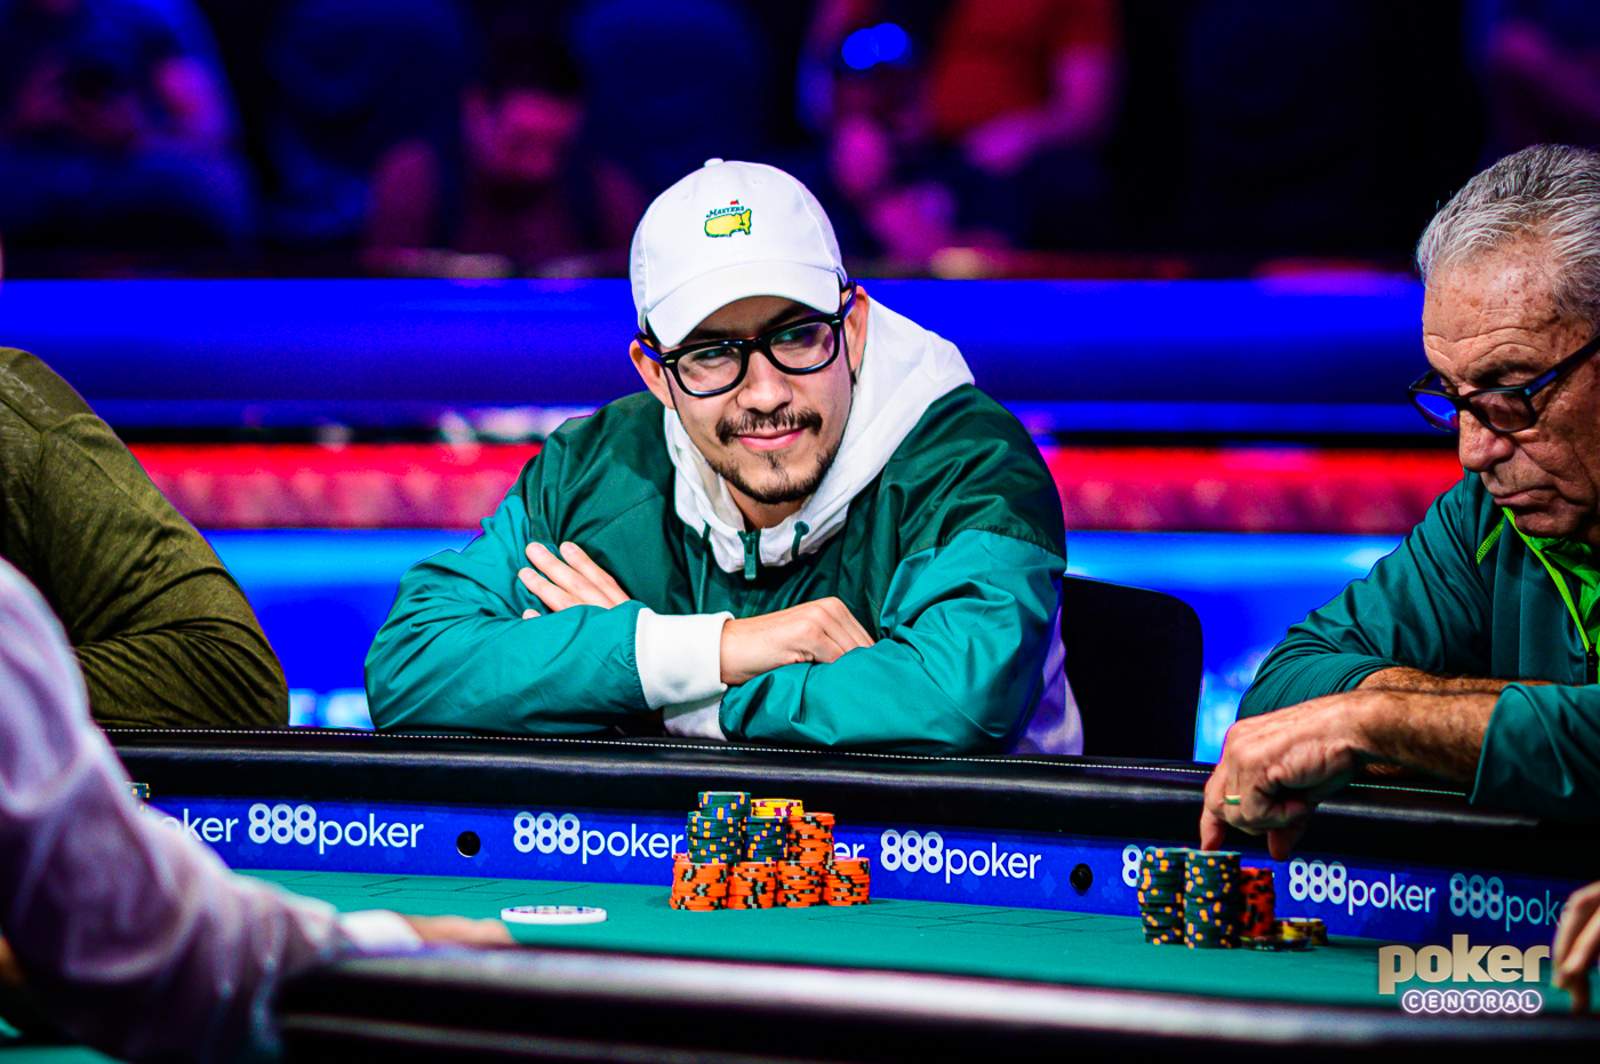 Phil Hui's Epic PPC Journey, Shaun Deeb and Phil Ivey Share the Felt & Smith Wants Bathroom Break Incentives